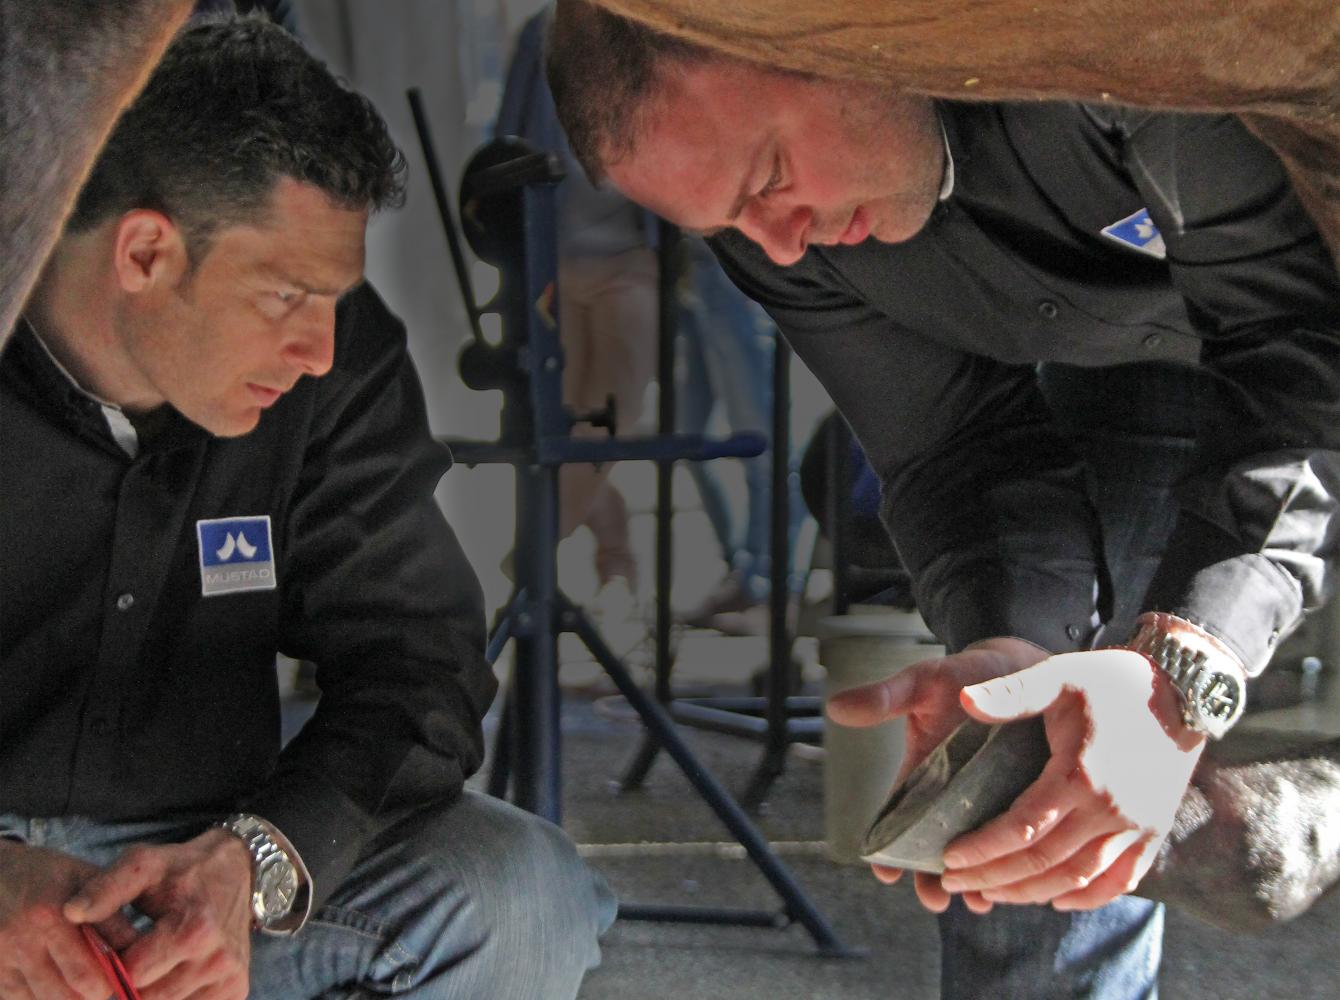 2 farriers discussing a shoeing solution